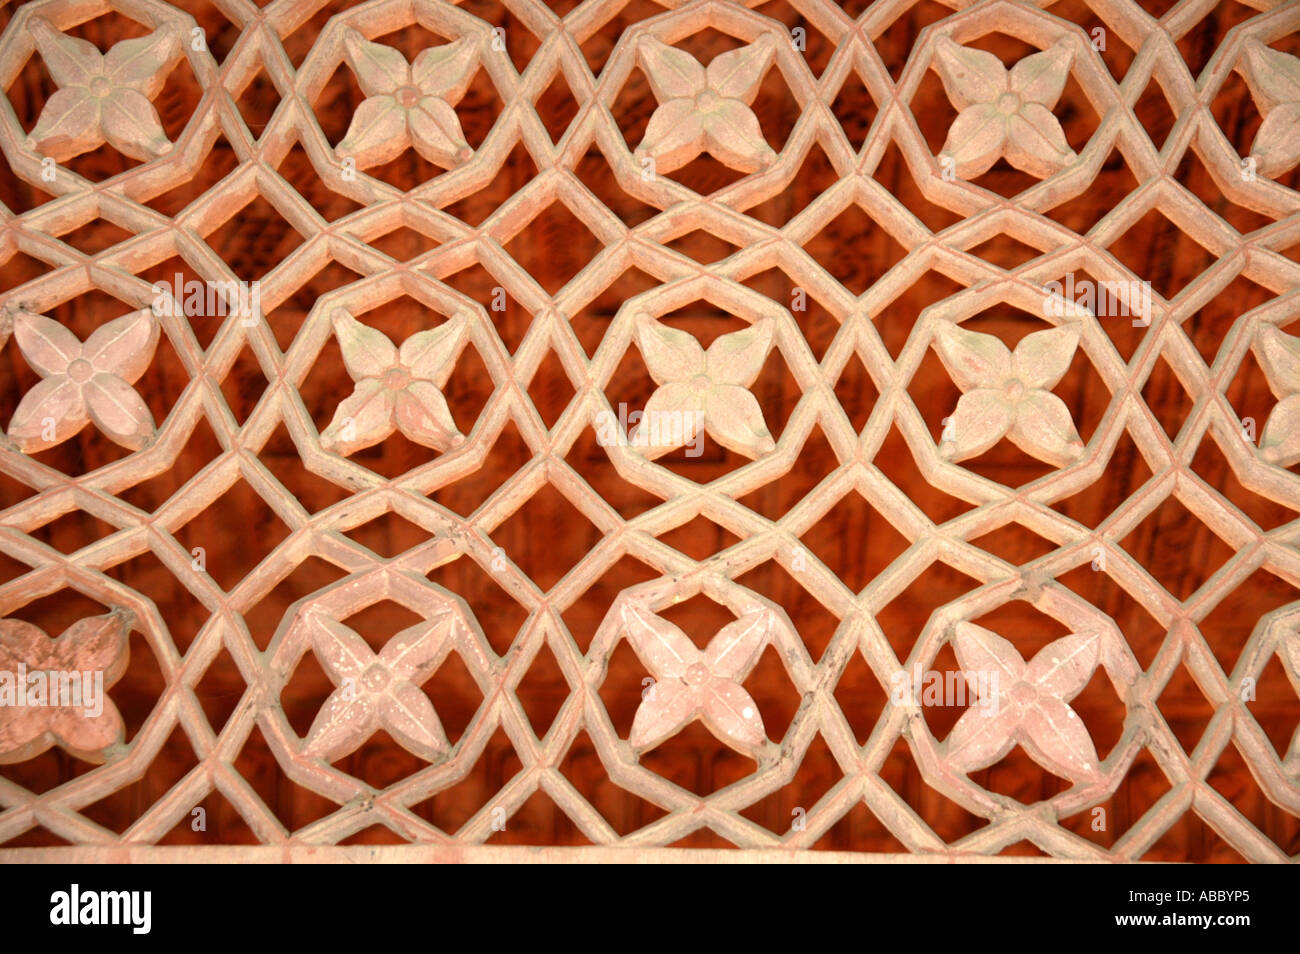 Background picture Fine arts in sandstone flower ornaments in Indian style Akbar Fort Fatehpur Sikri Uttar Pradesh India Stock Photo